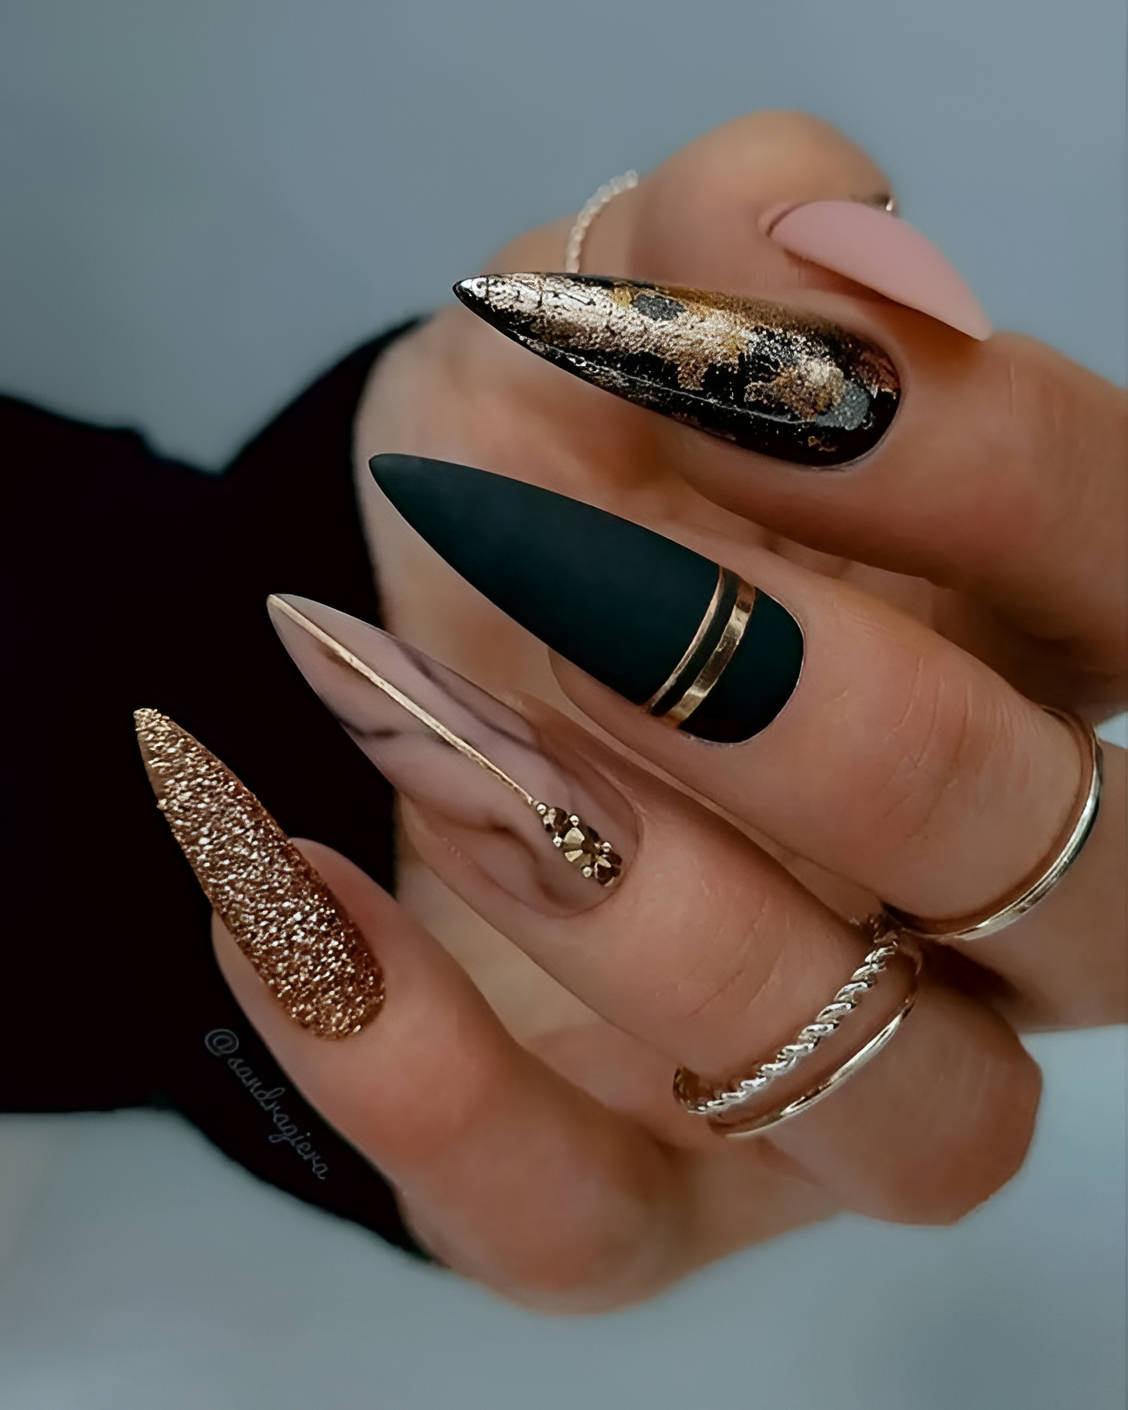 Black Stiletto Nails With Gold